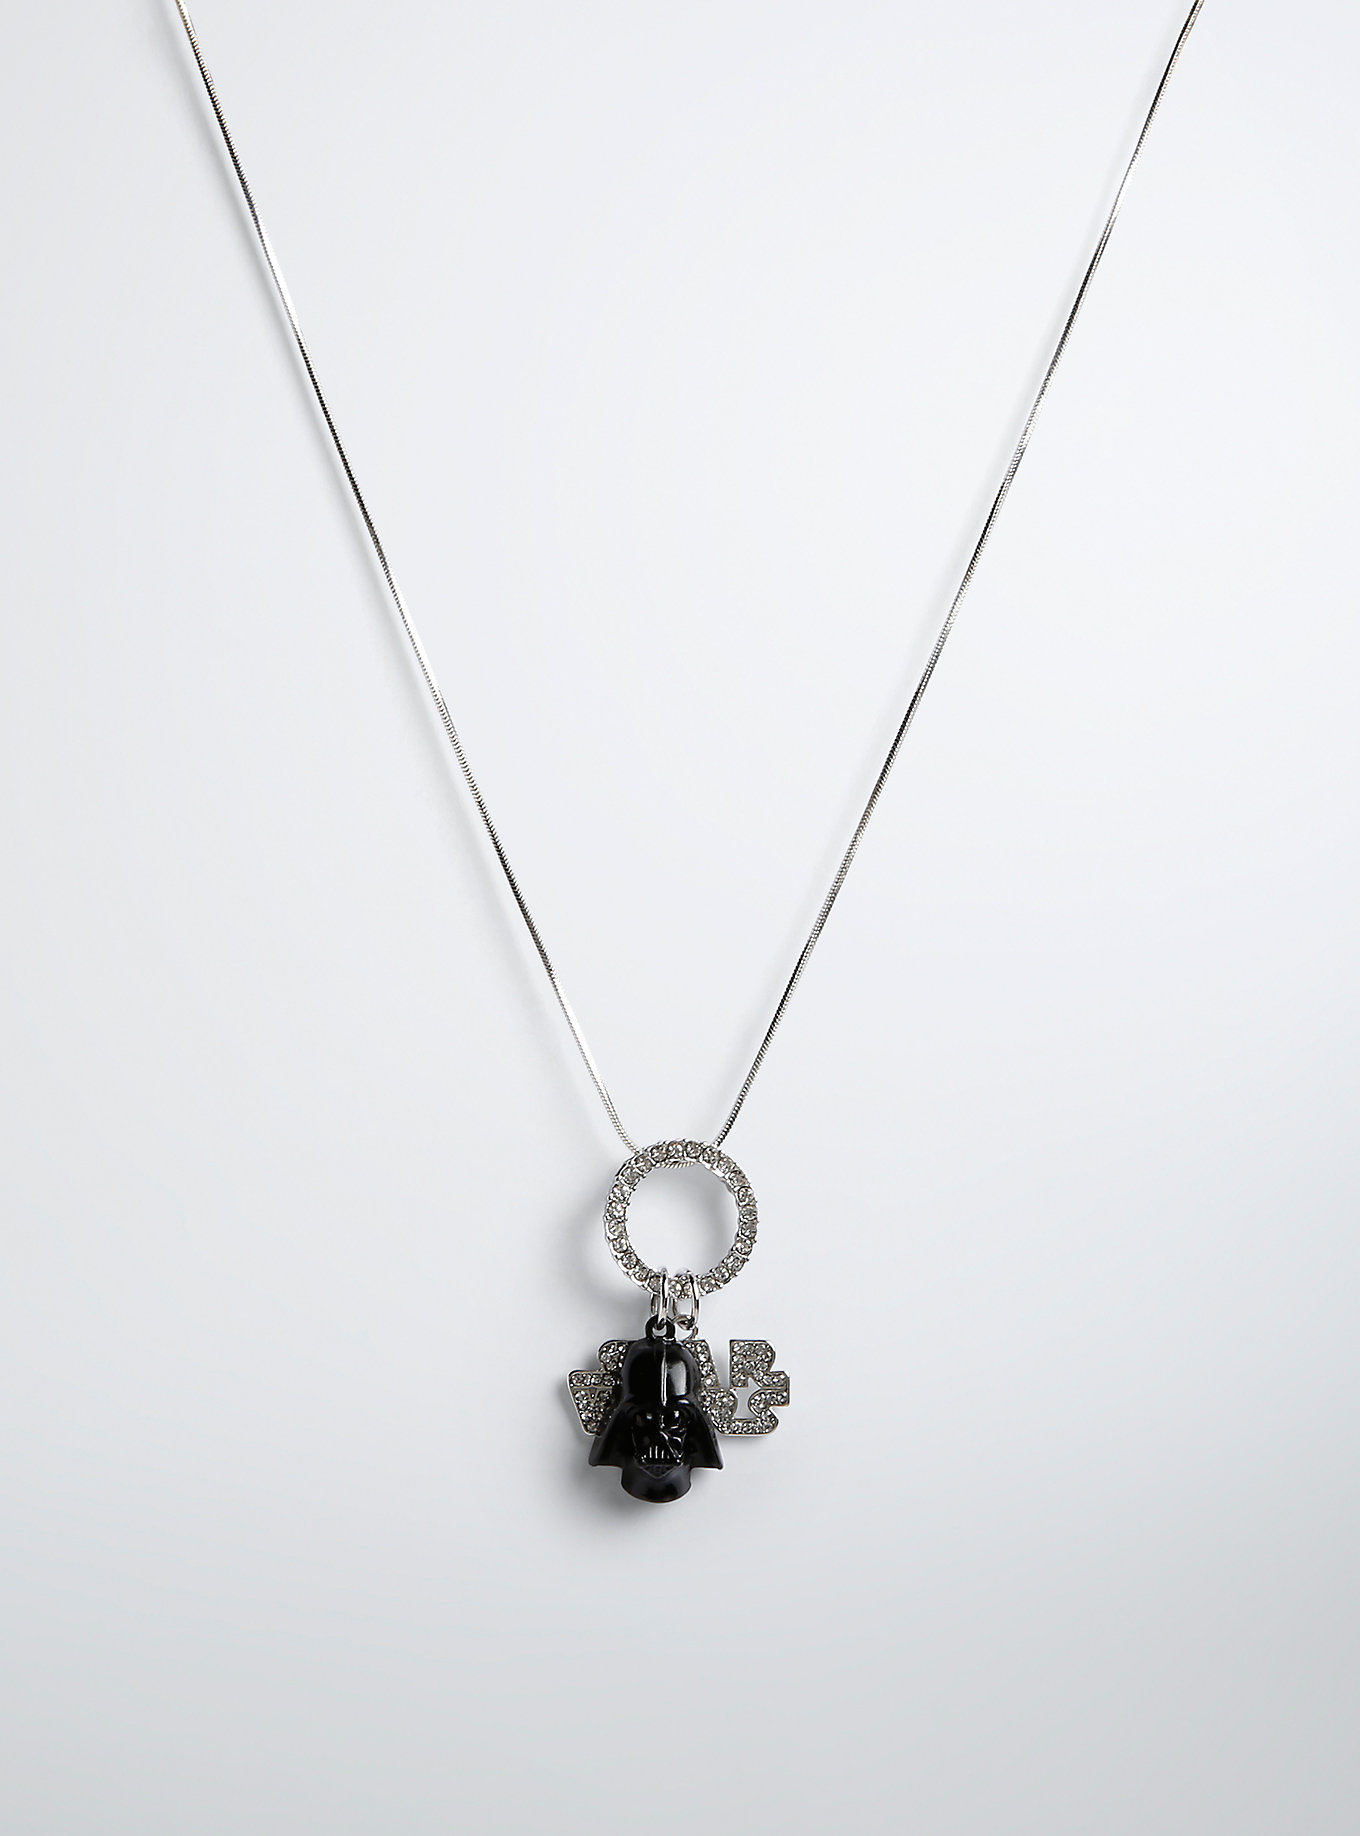 New necklaces at Torrid - The Kessel Runway